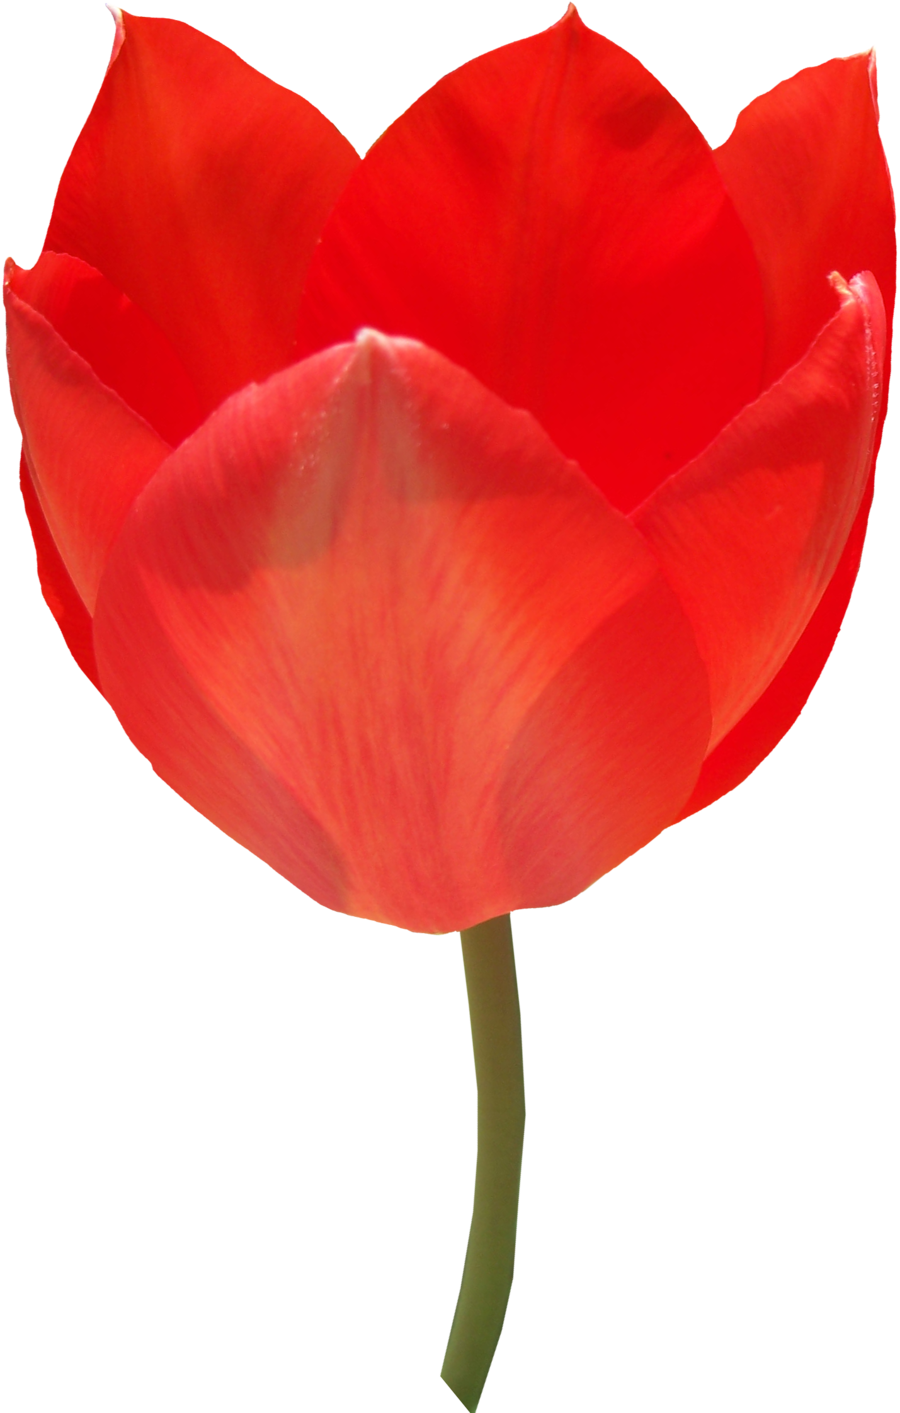 Vibrant Red Tulip Single Bloom PNG